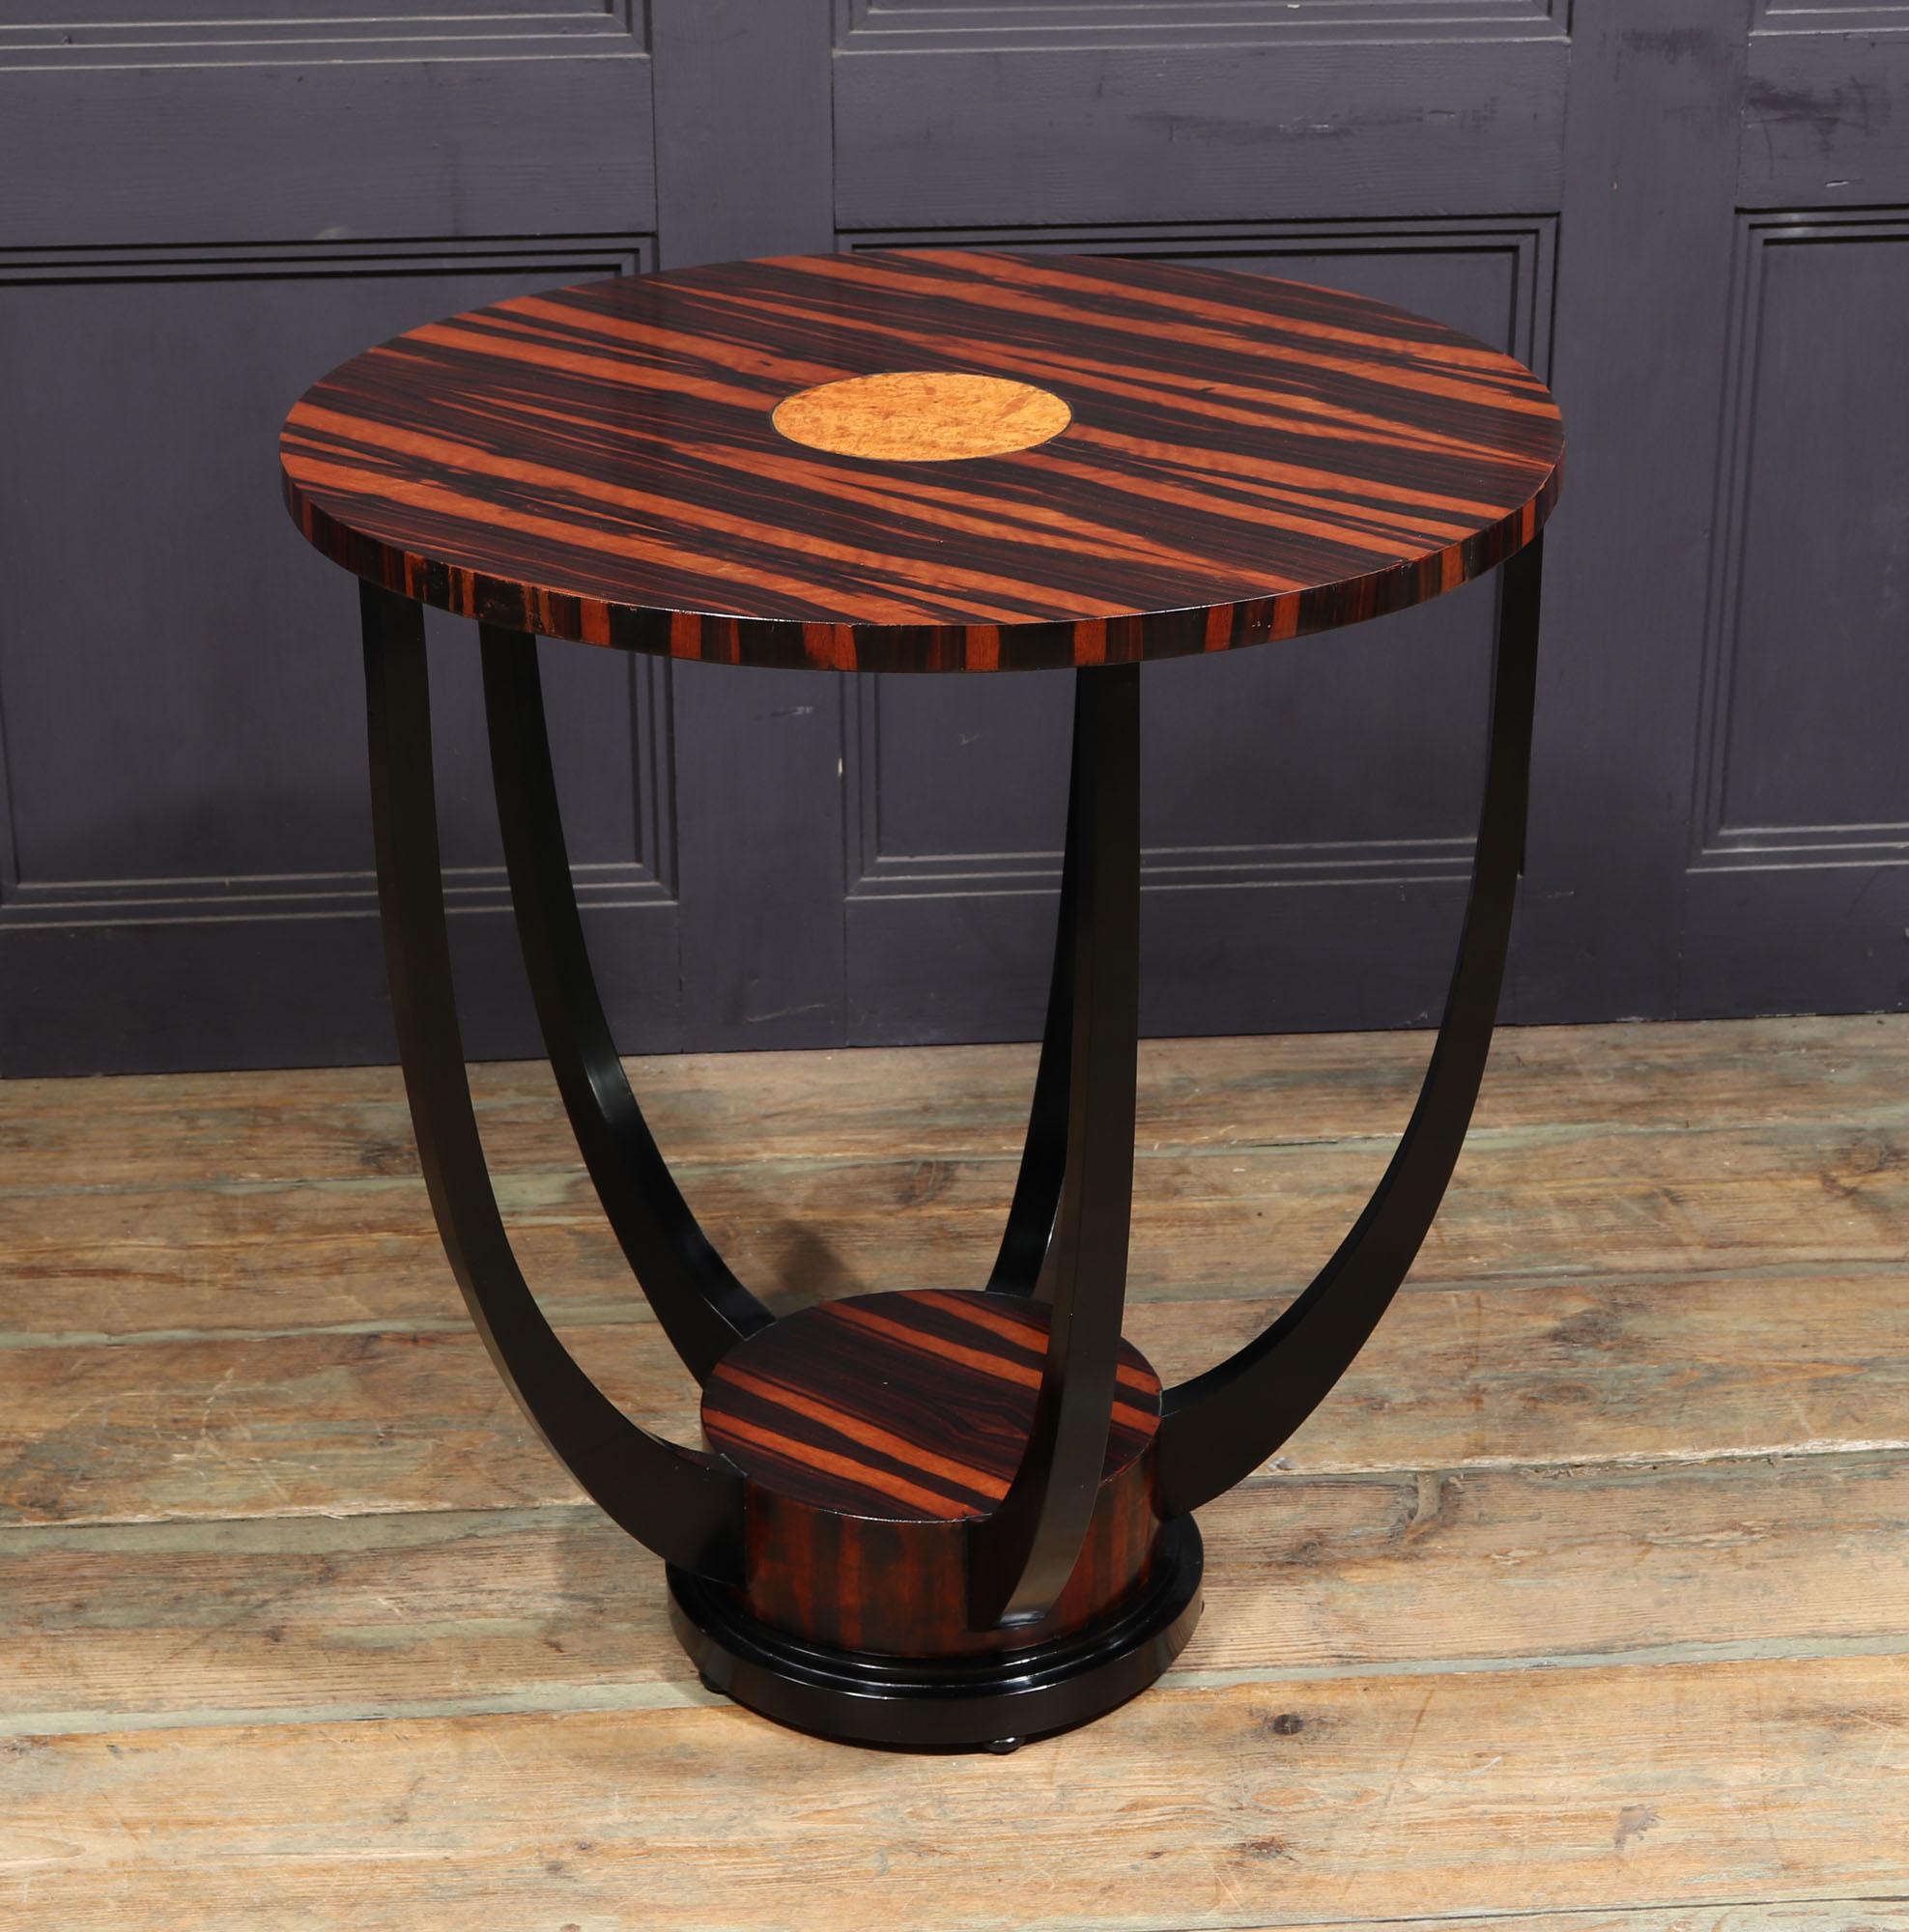 FRENCH ART DECO SIDE TABLE
A French Art Deco side table in Macassar ebony with amboyna inlayed centre with five shaped uprights supporting the top and an ebonies stepped base with four small bun feet The table has been restored and fully polished by